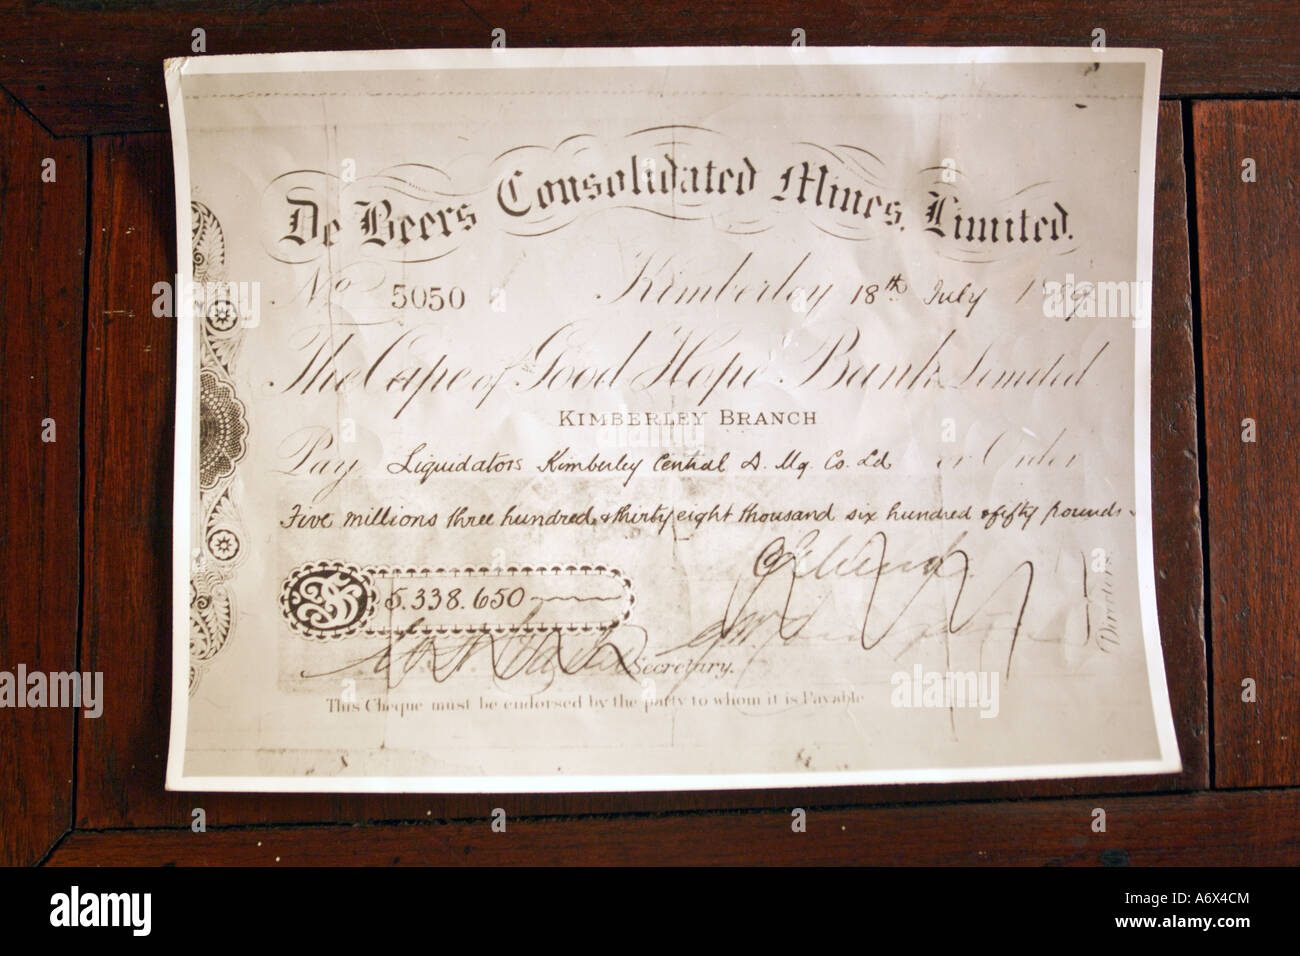 Facsimile of the cheque written out by De Beers Consolidated Mines Limited on 18 July 1889 for the purchase of Kimberley Mine. Stock Photo